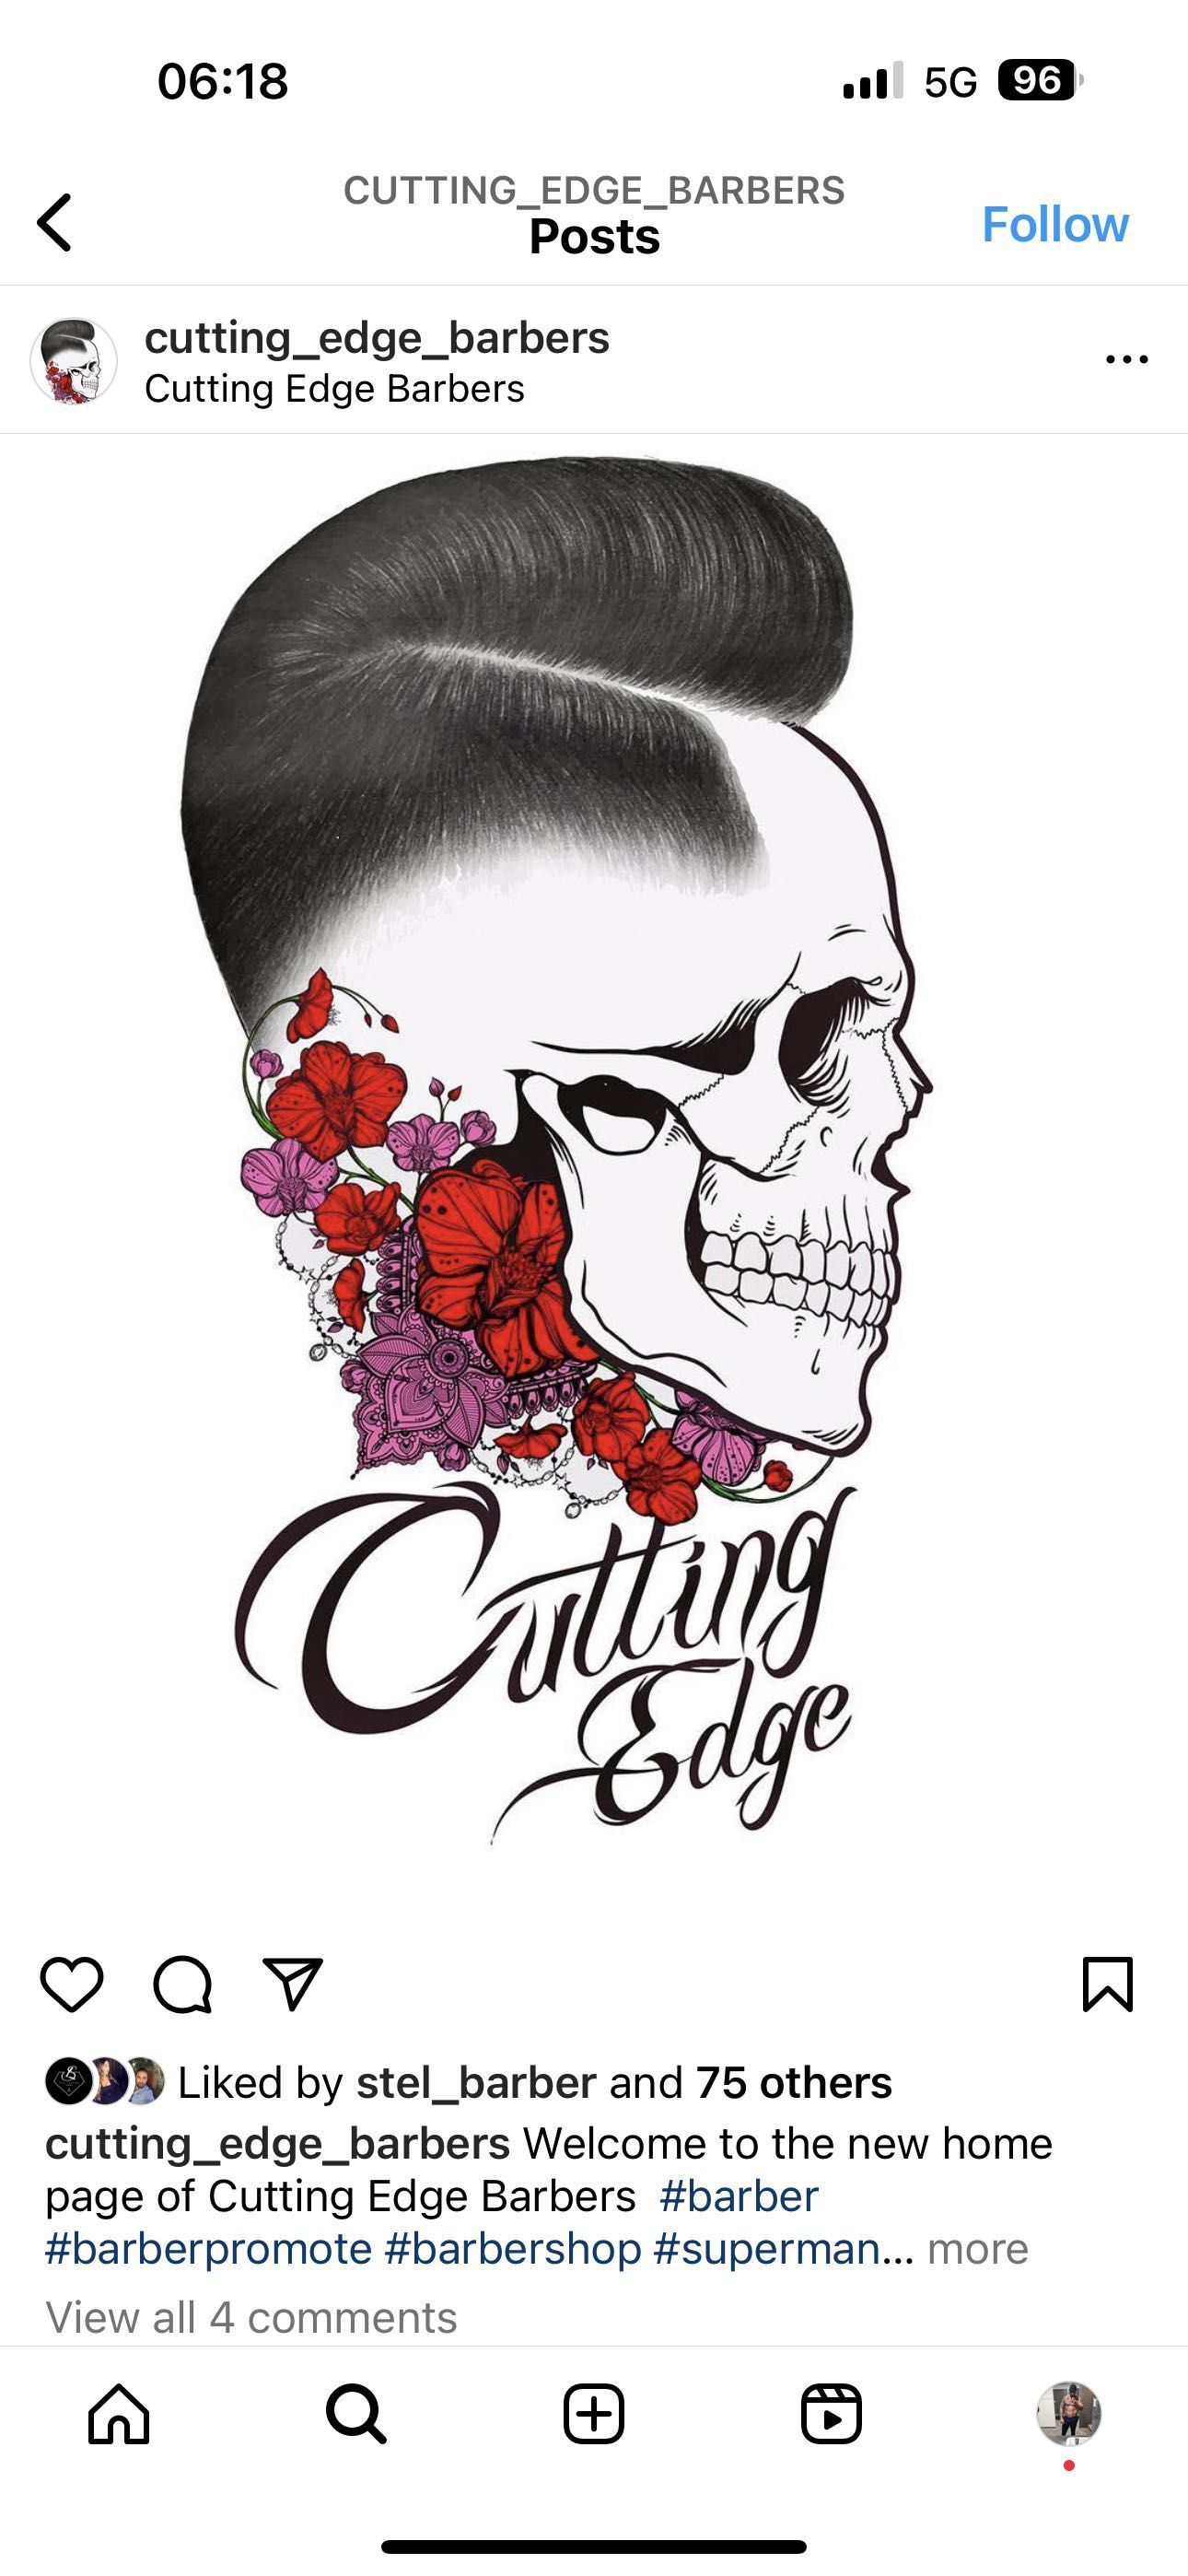 Nick Pastellis at Cutting Edge Barbers, 11 Queen Annes Place, EN1 2QB, Enfield, Enfield